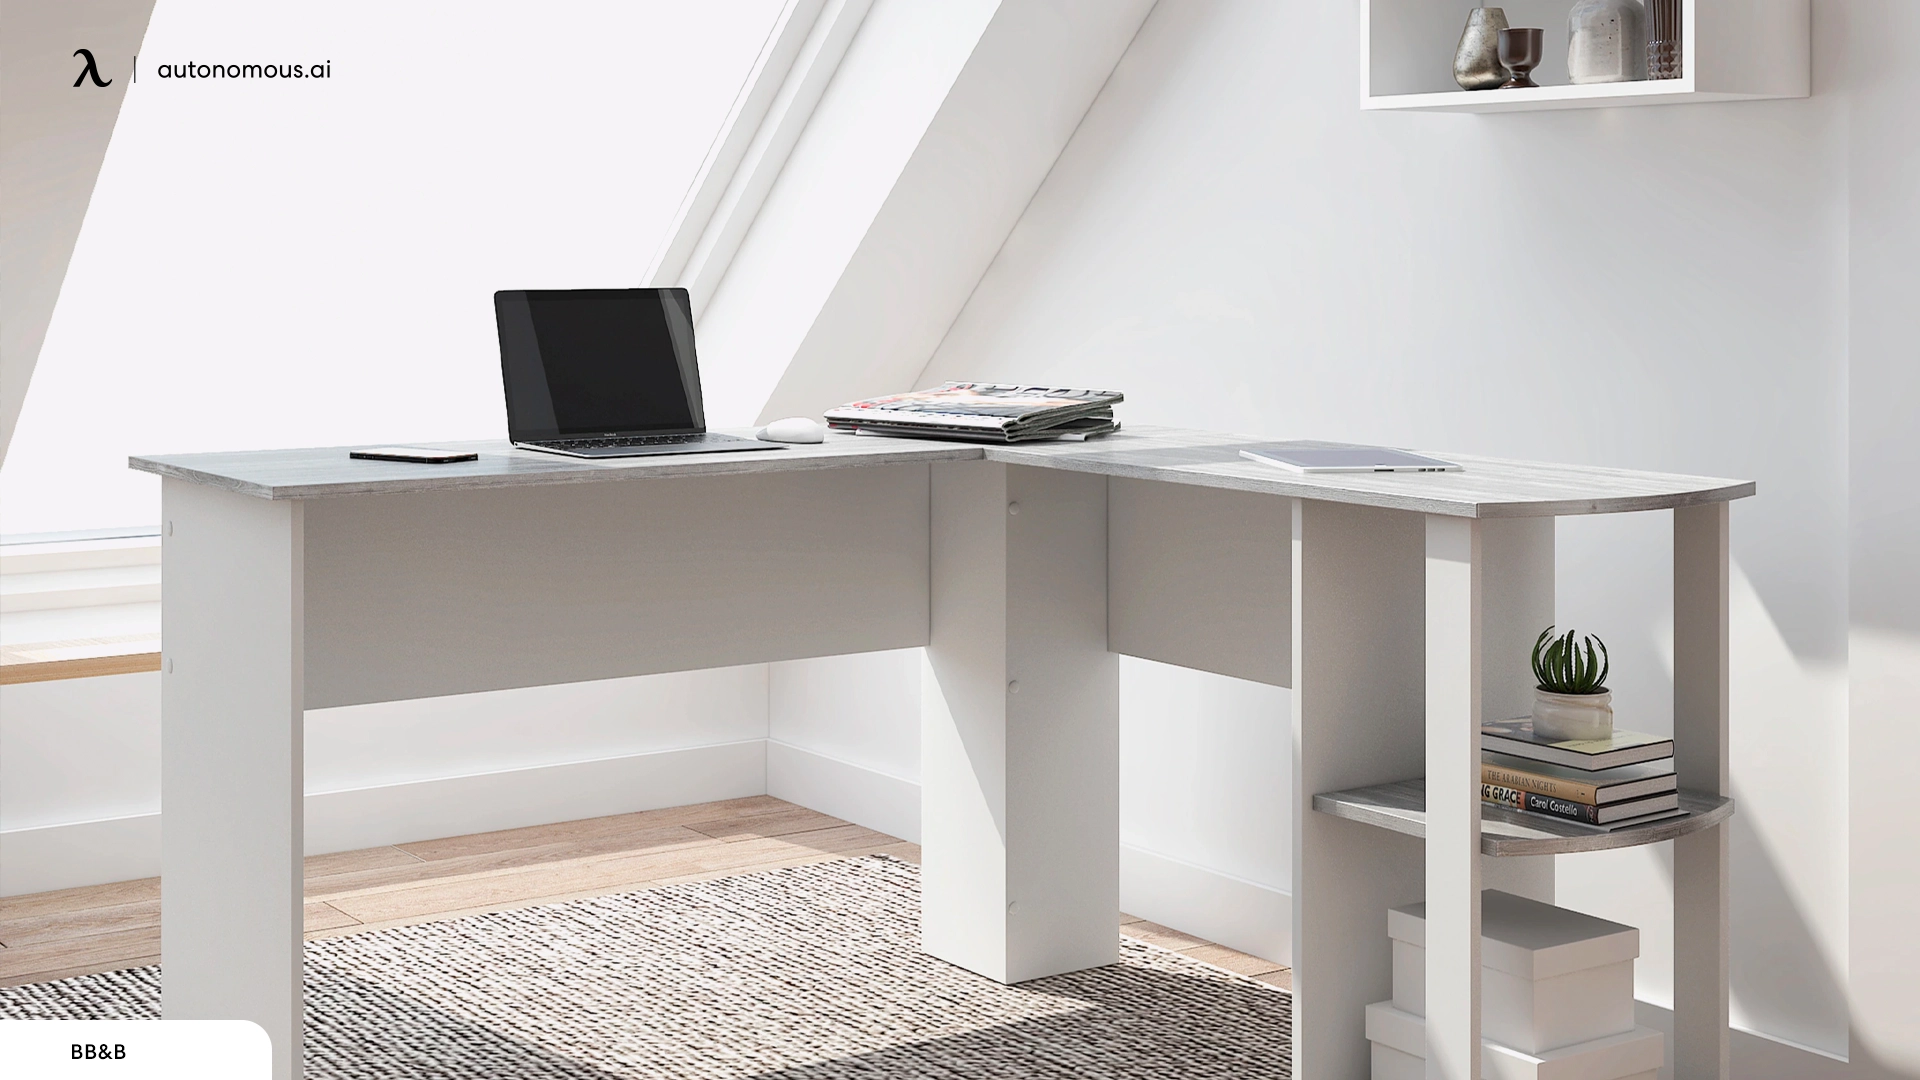 Reduce Visual Clutter with L-shaped desks for home office